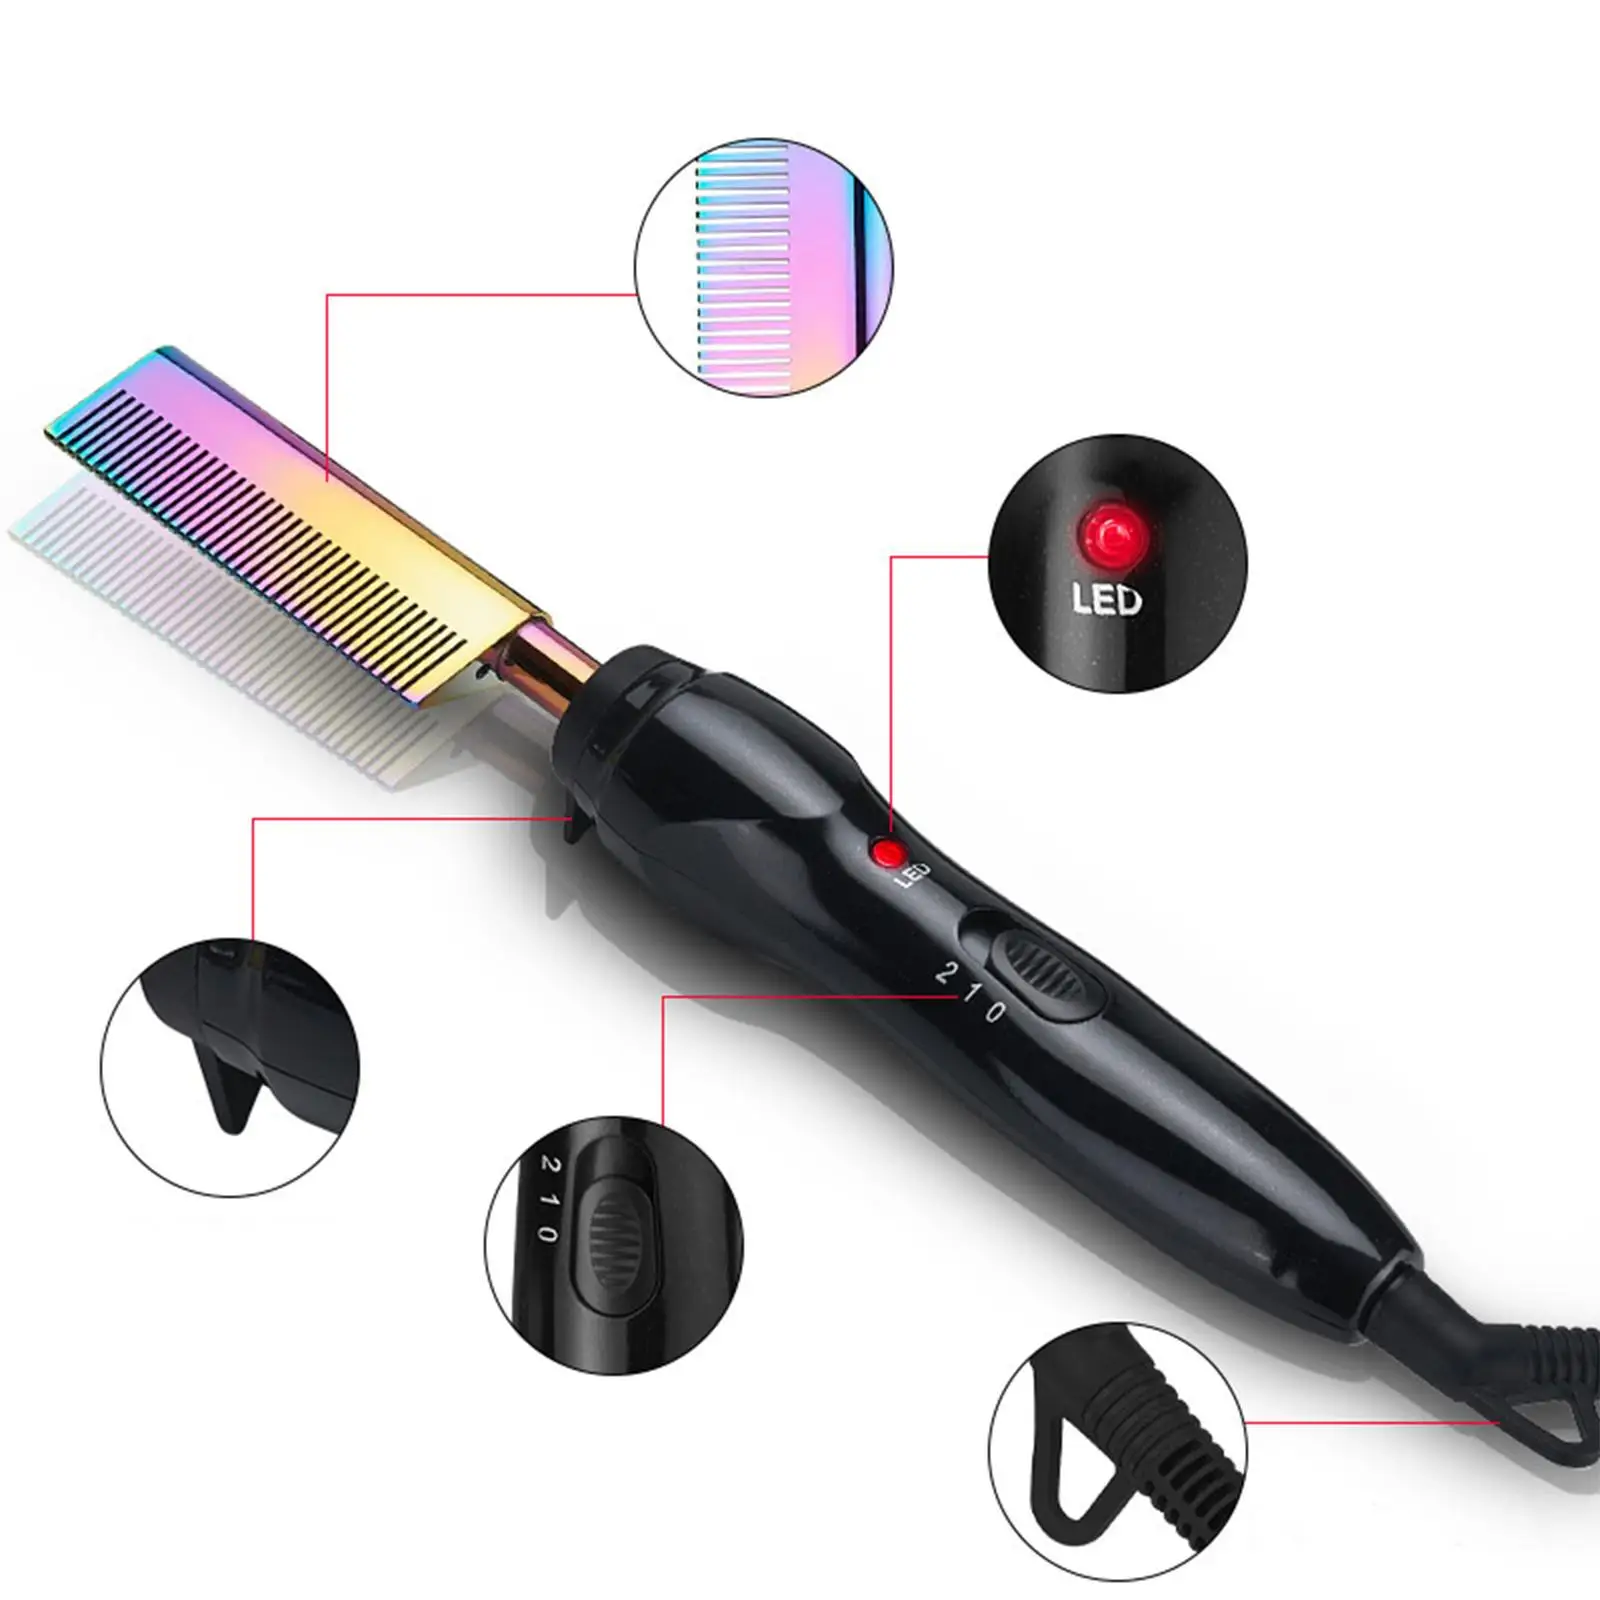 Hair Straightener Comb Brush 2-In-1 Adjustable Dual Use Automatically Straight Volume Comb US Plug Hair Styling Men Black Beard